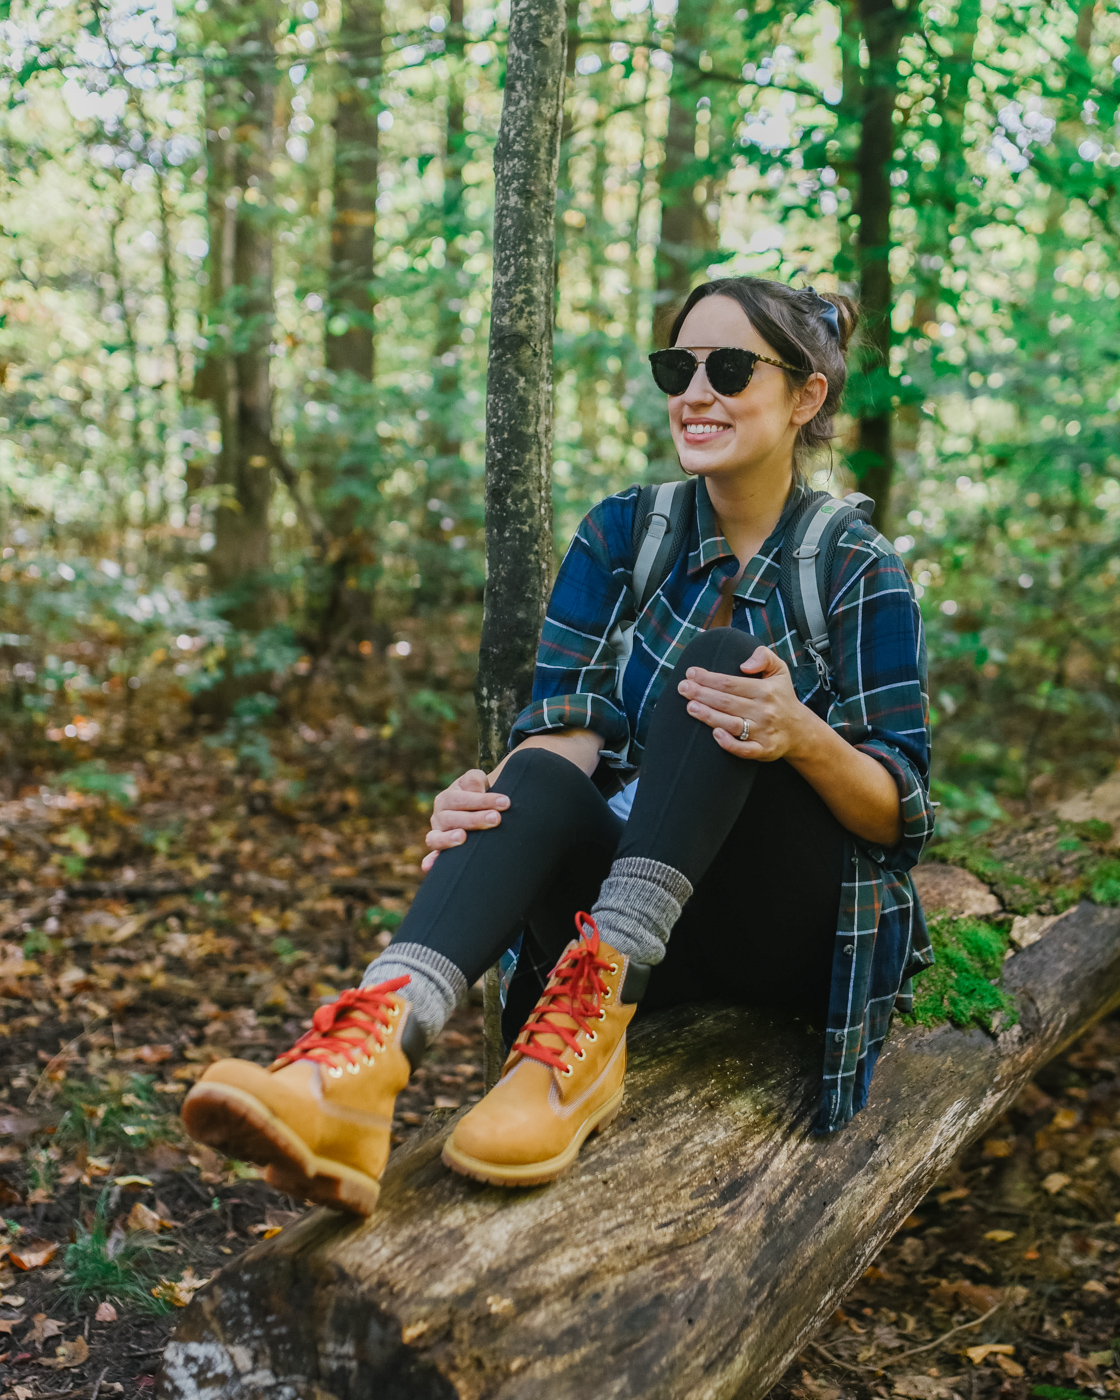 10 Hiking fall ideas  hiking outfit women, camping outfits